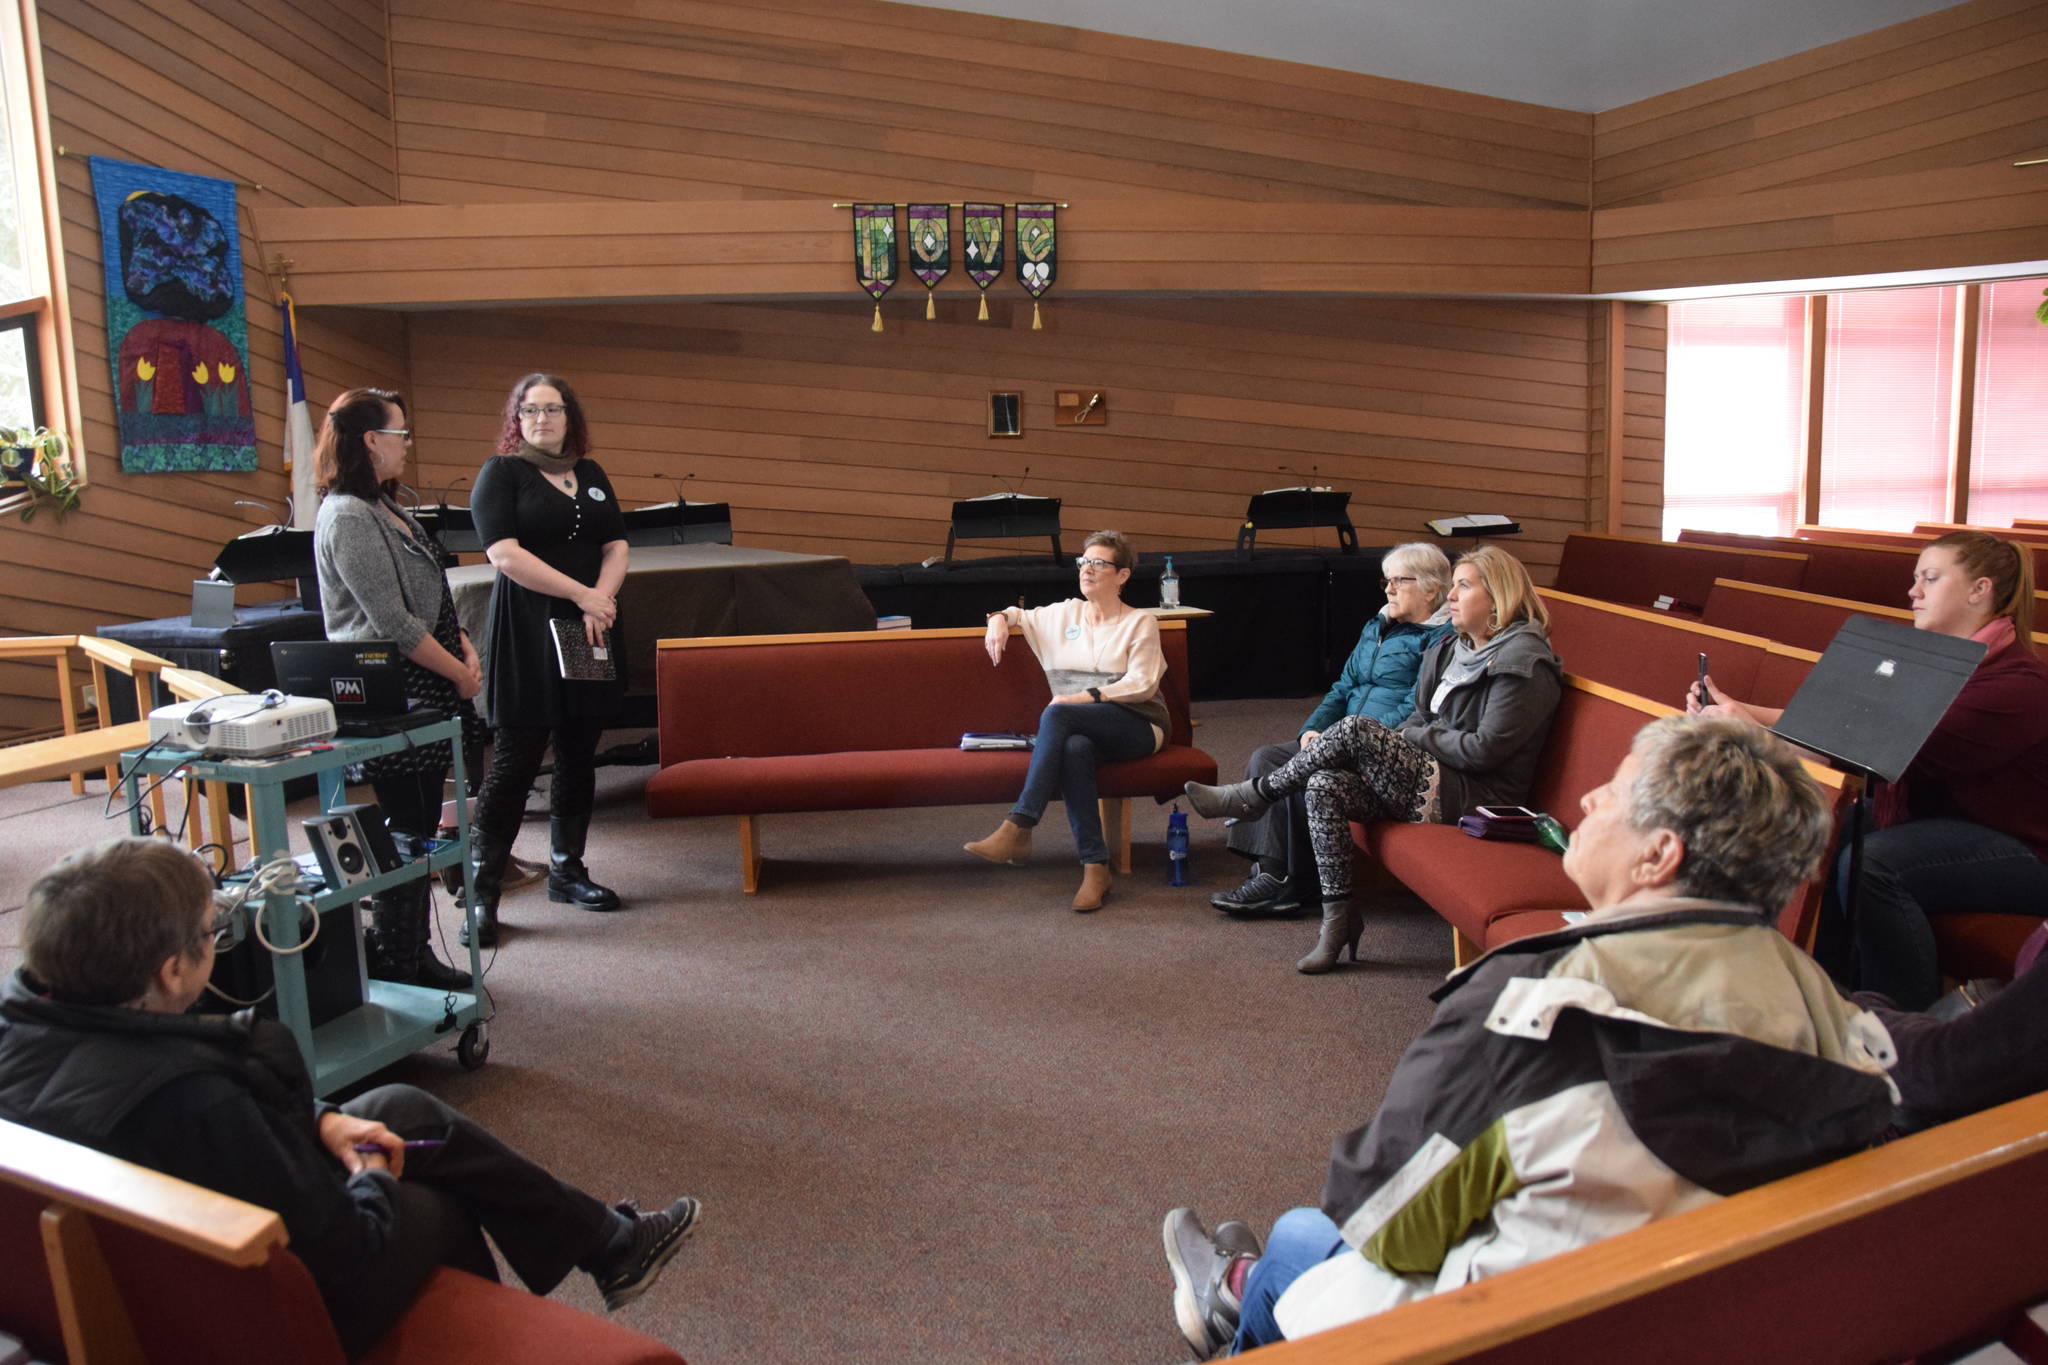 Community United for Safety and Protection (CUSP), a state advocacy group, meets with members of the community at the Christ Lutheran Church in Soldotna on Monday. (Photo by Brian Mazurek/Peninsula Clarion)